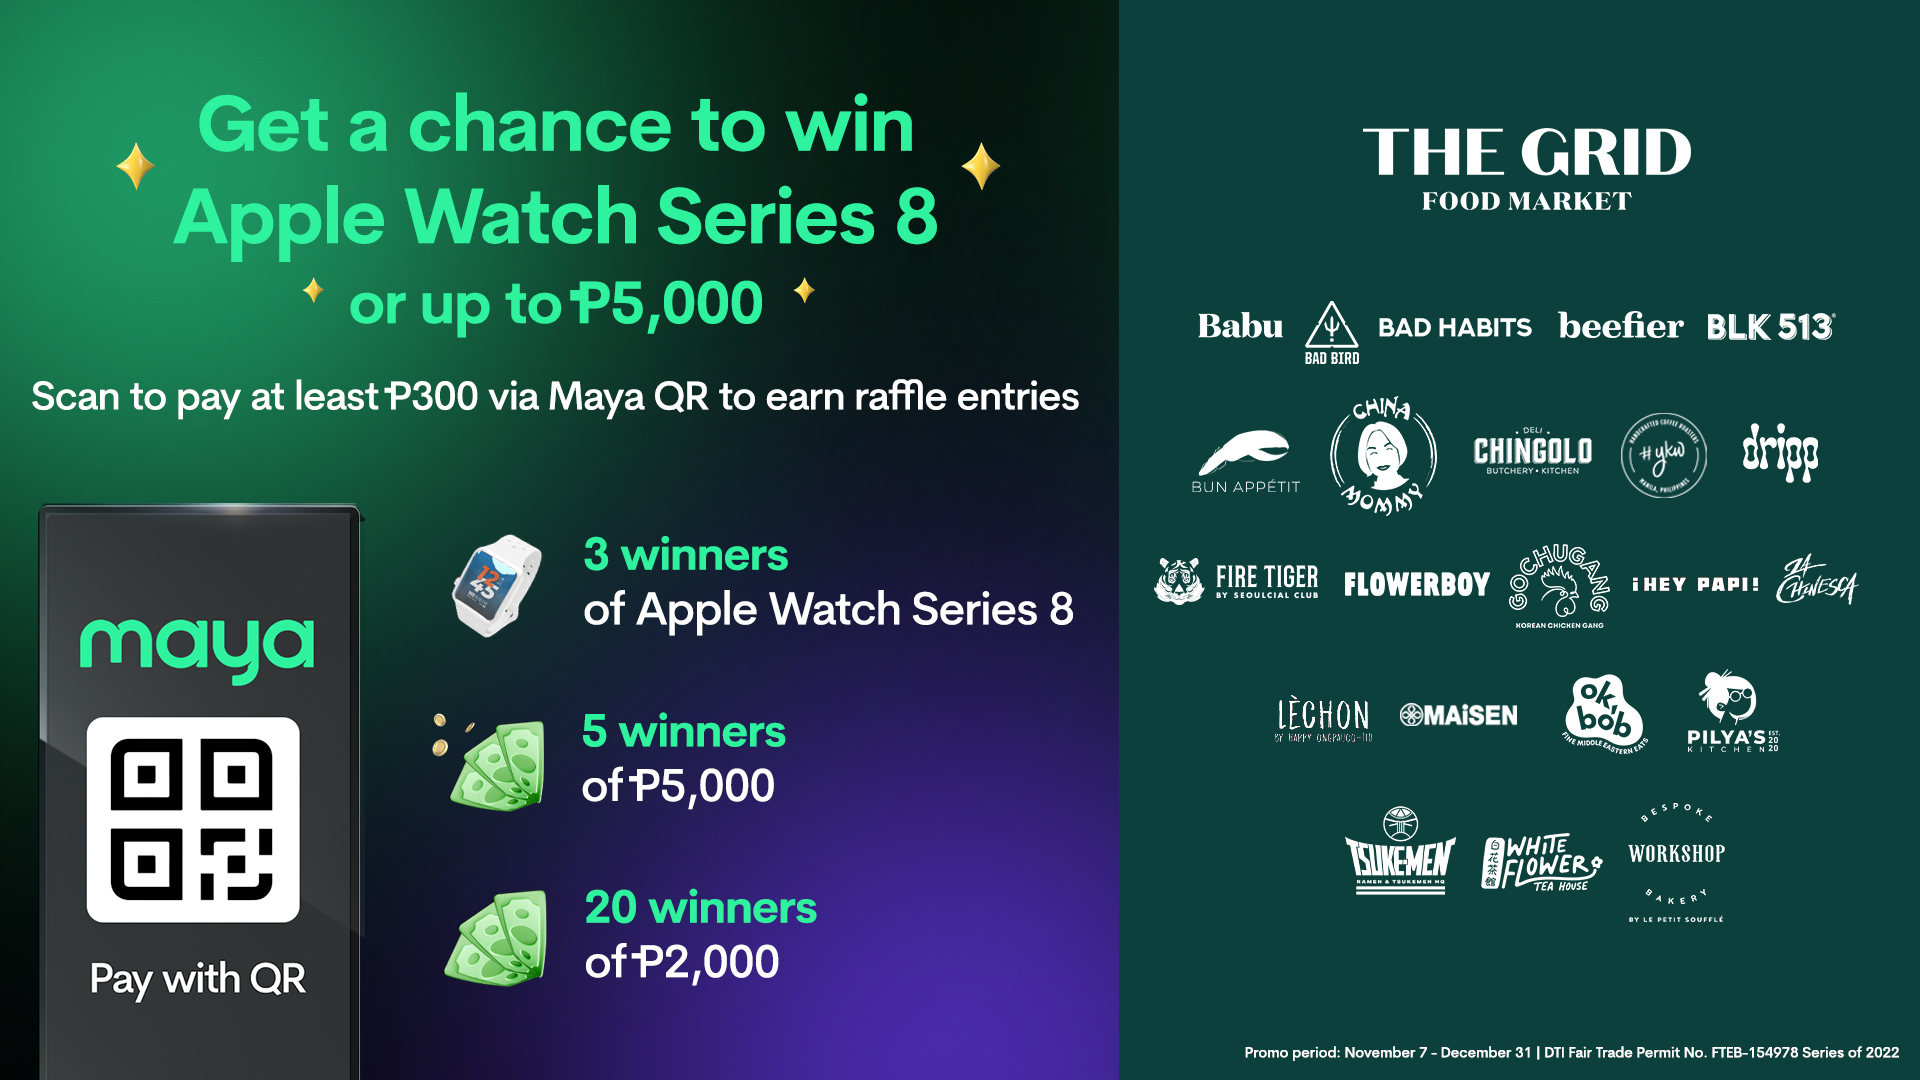 Win an Apple Watch Series 8 or up to P5,000 at The Grid